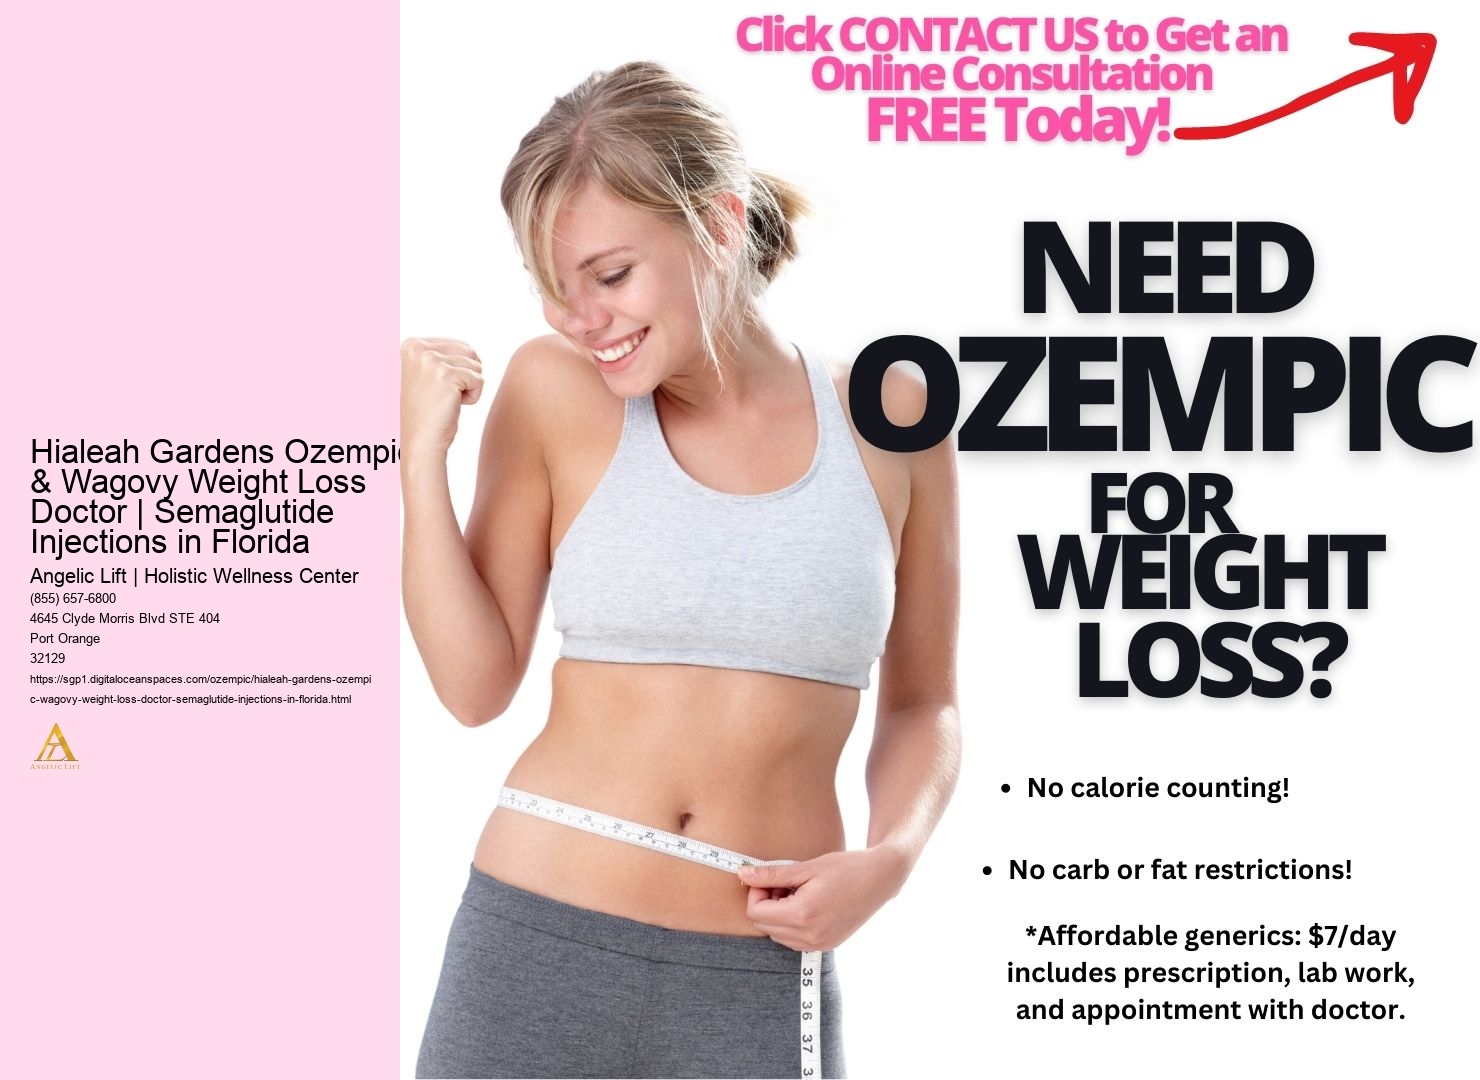 Hialeah Gardens Ozempic & Wagovy Weight Loss Doctor | Semaglutide Injections in Florida